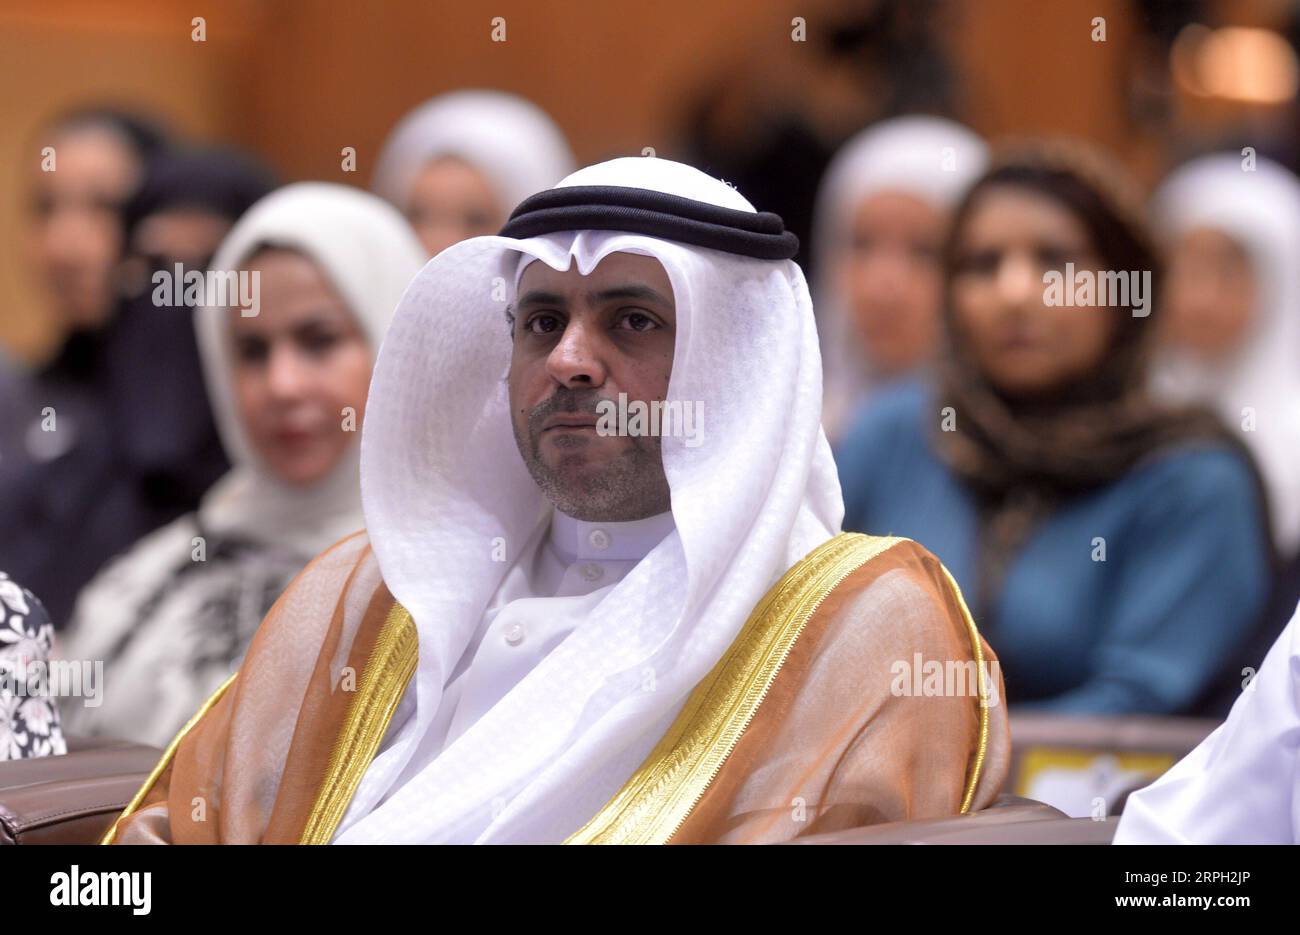 191027 -- FARWANIYA GOVERNORATE, Oct. 27, 2019 -- Kuwaiti Information Minister Mohammad Al-Jabri attends a forum of female journalists in Farwaniya Governorate, Kuwait, Oct. 27, 2019. Kuwaiti Journalists Association KJA launched on Sunday a forum of female journalists from across the Gulf region to boost media cooperation in the region. Photo by Asad/Xinhua KUWAIT-FARWANIYA GOVERNORATE-FEMALE JOURNALISTS FORUM NiexYunpeng PUBLICATIONxNOTxINxCHN Stock Photo